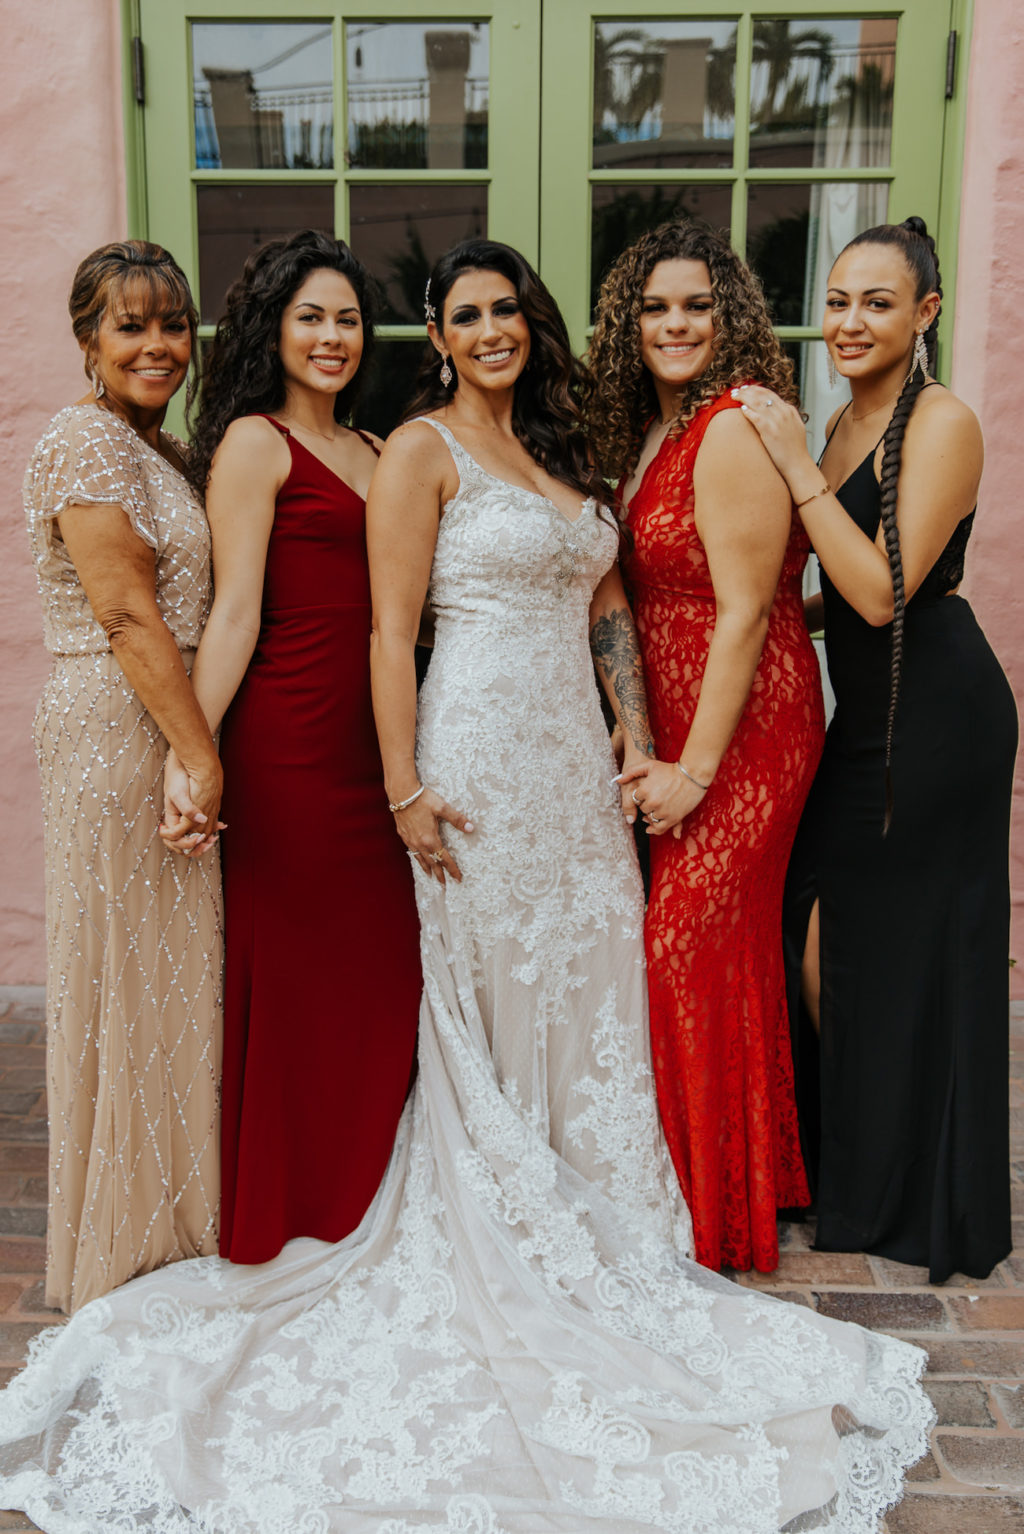 Outdoor Bridal Party Portrait | Bride Wearing an Illusion Lace V Neck Sheath Bridal Gown Wedding Dress with Champagne Liner by Ashley and Justin Bride | Bridesmaids in Mismatched Dresses